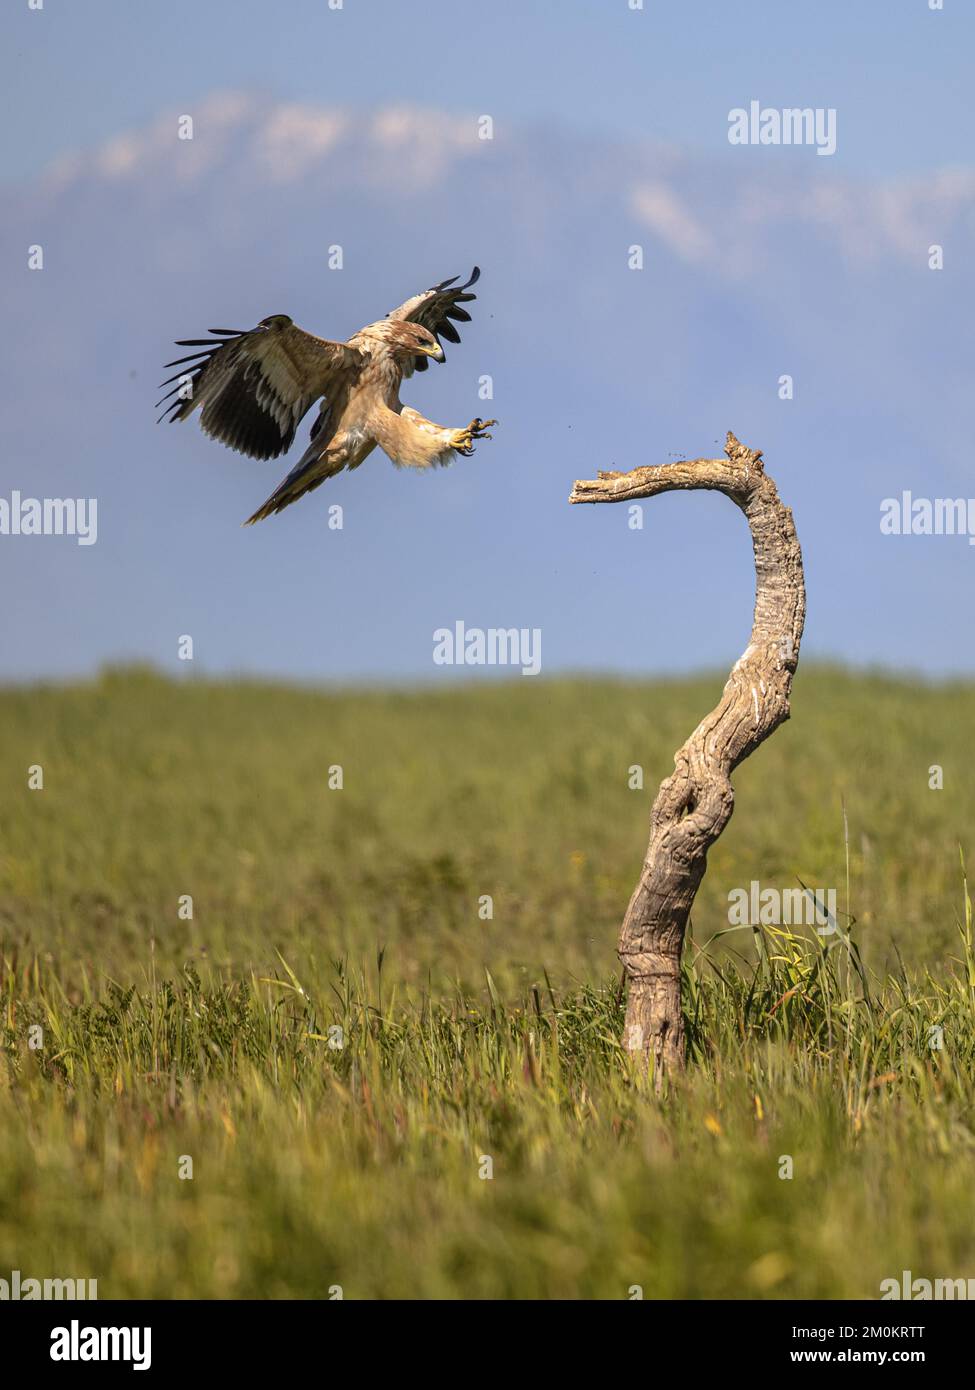 Spanish Imperial Eagle (Aquila adalberti) juvenile landing in tree on bright mountain background. This rare and Endangered bird species occurs only in Stock Photo